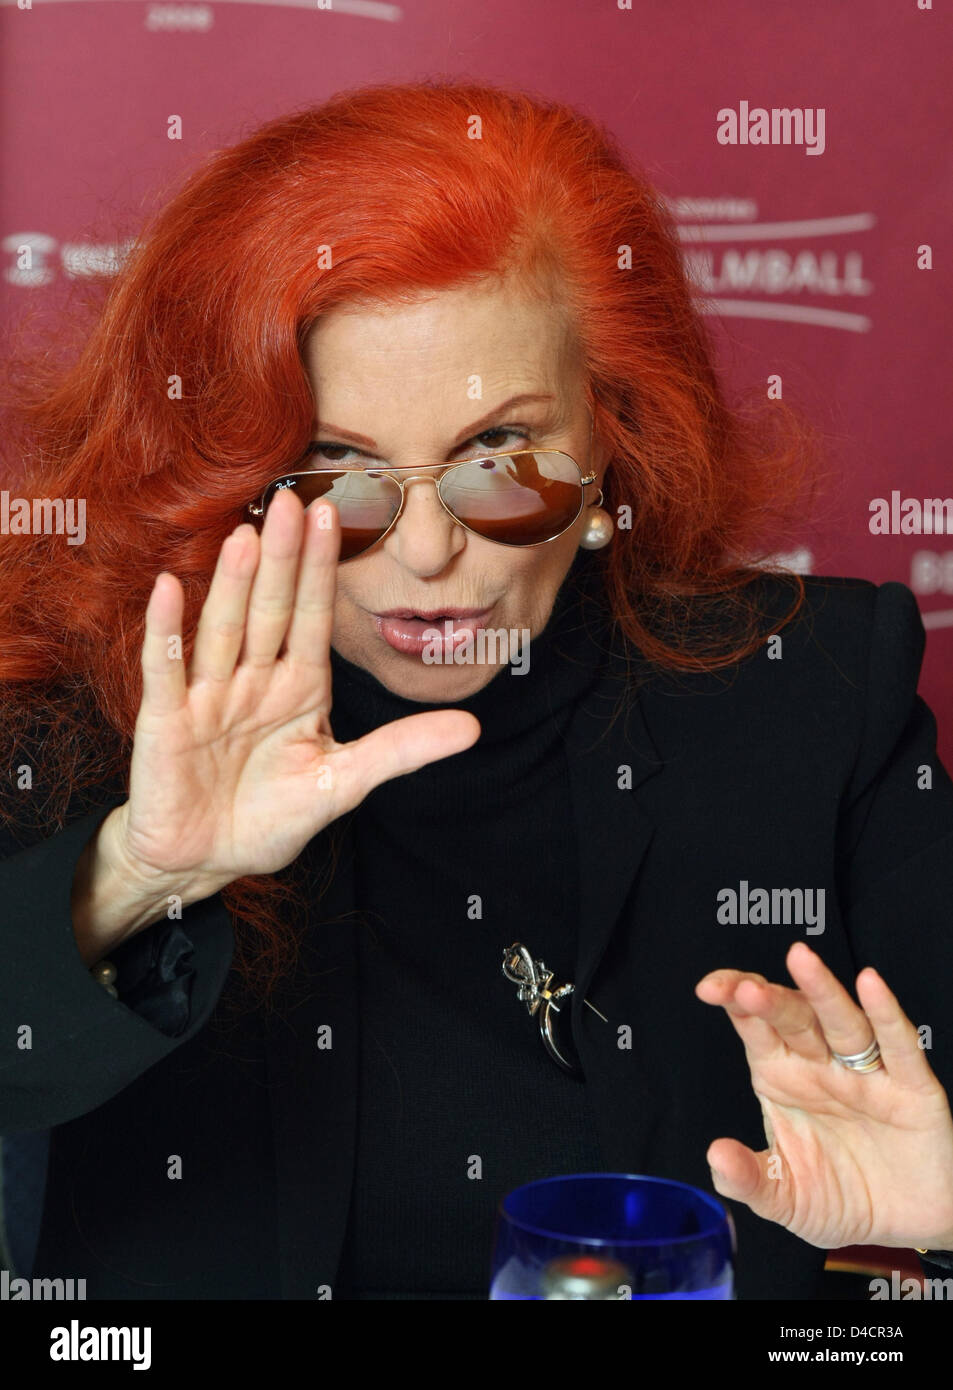 Italian singer Milva is pictured during a press conference at the 58th Berlin International Film Festival in Berlin, Germany, 14 February 2008. Milva will perform at the 'Filmball' of the 58th Berlinale later that day. Photo: SOEREN STACHE Stock Photo